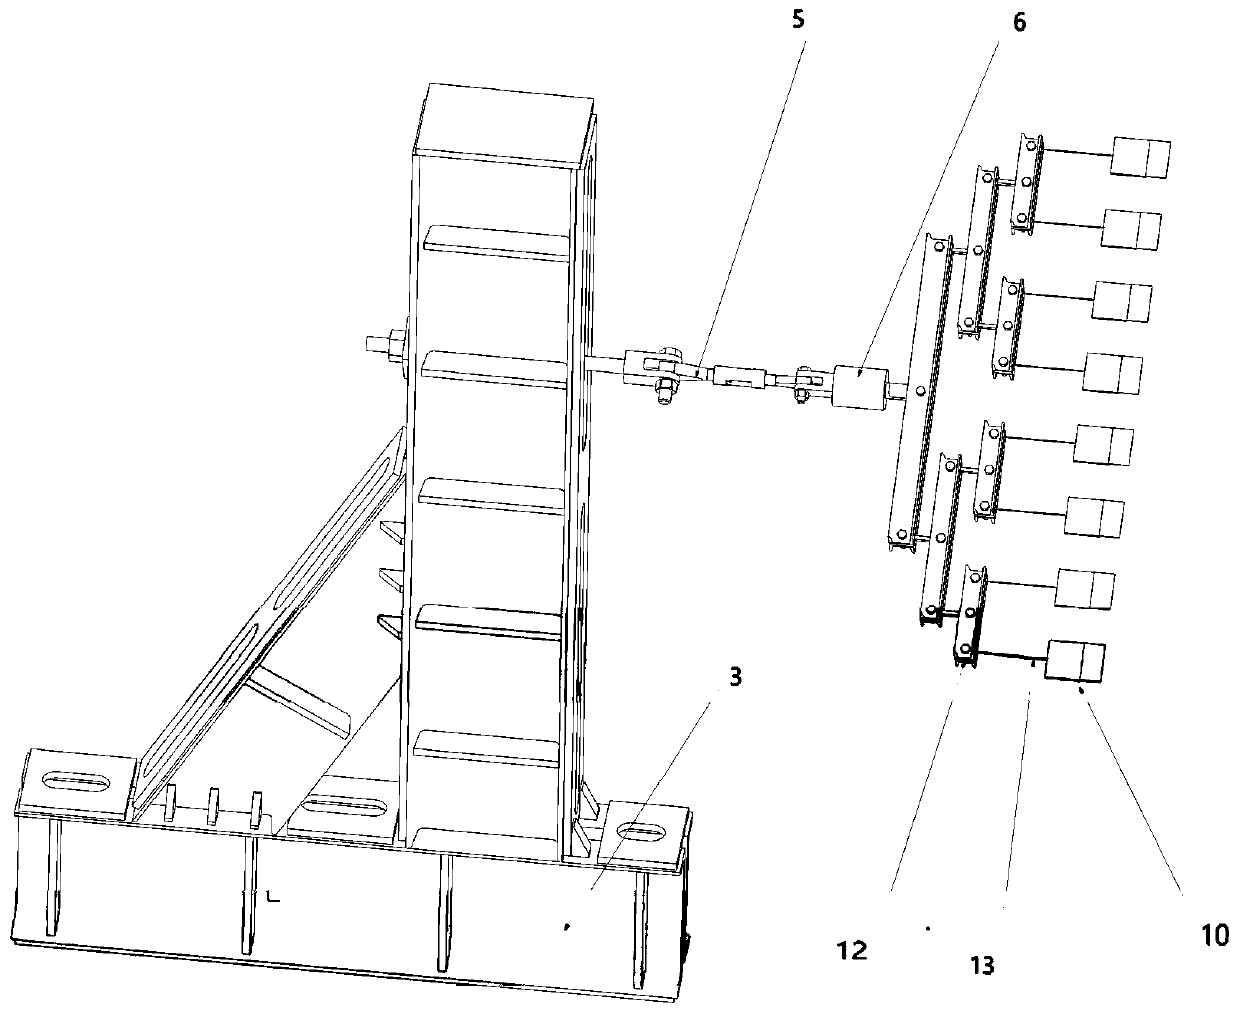 Fuselage cabin section structural strength test constraint system